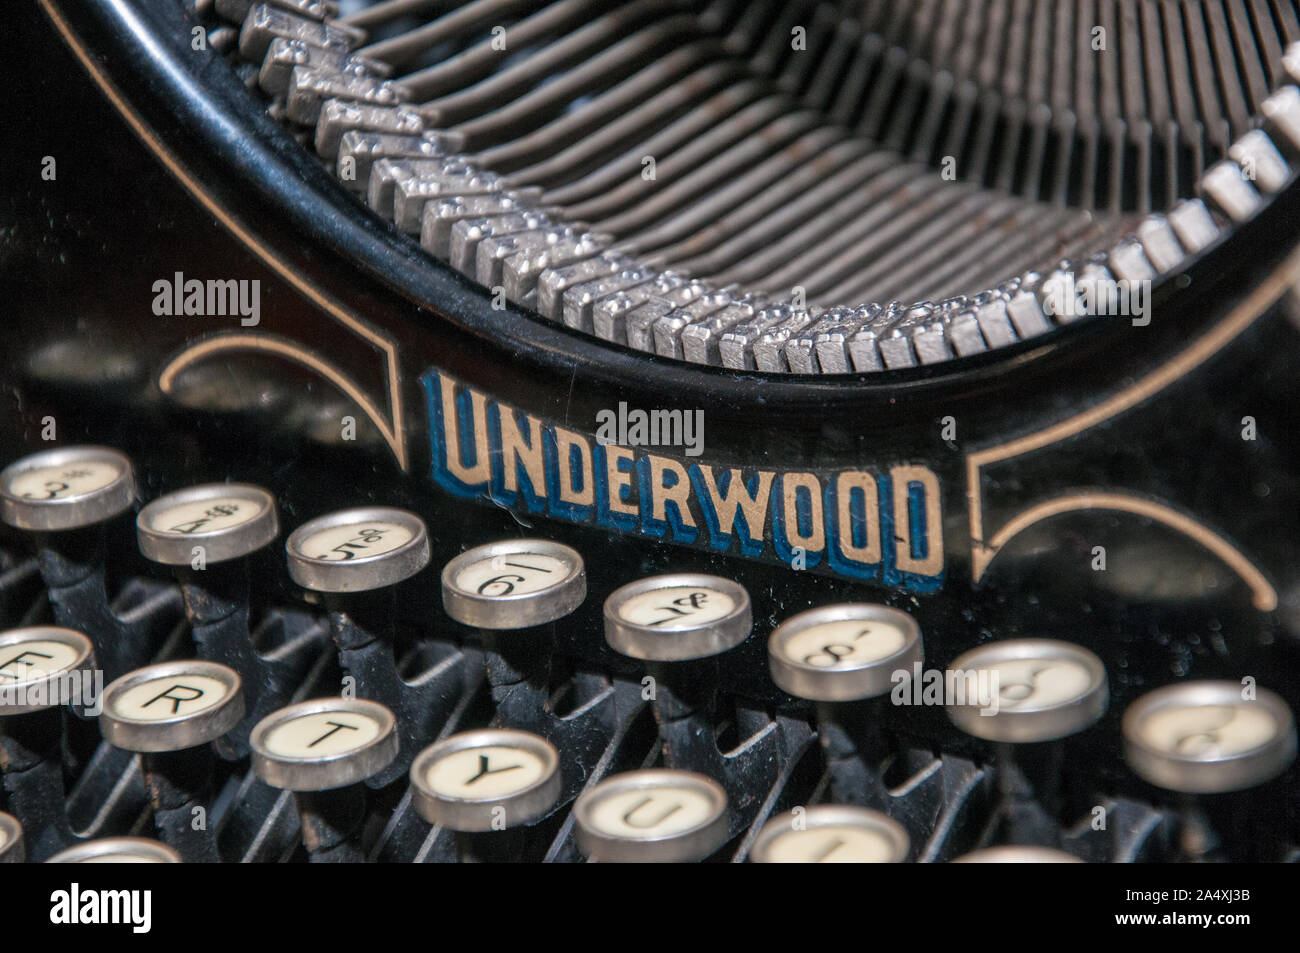 Old typewriters remind us that we have come a long way -- fast - from these mechanical machines to blazing fast computers in modern offices. Stock Photo